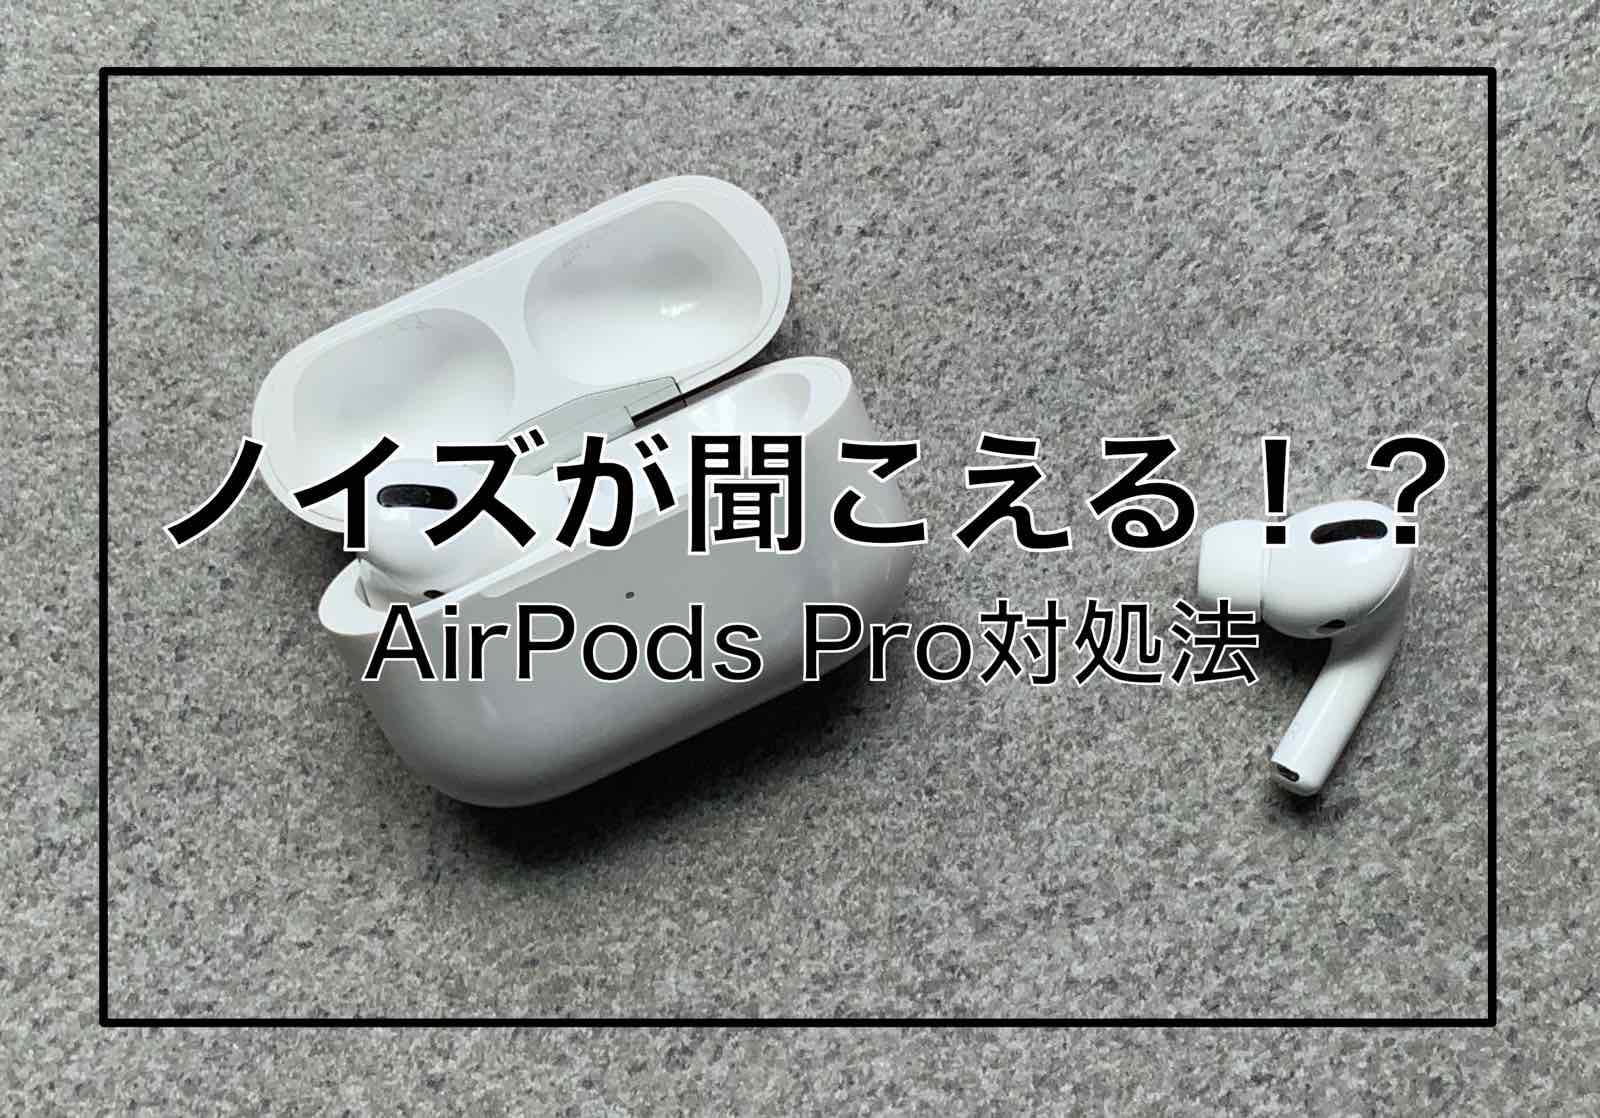 Apple AirPods Pro 初代 第1世代 (右耳ノイズ有り)